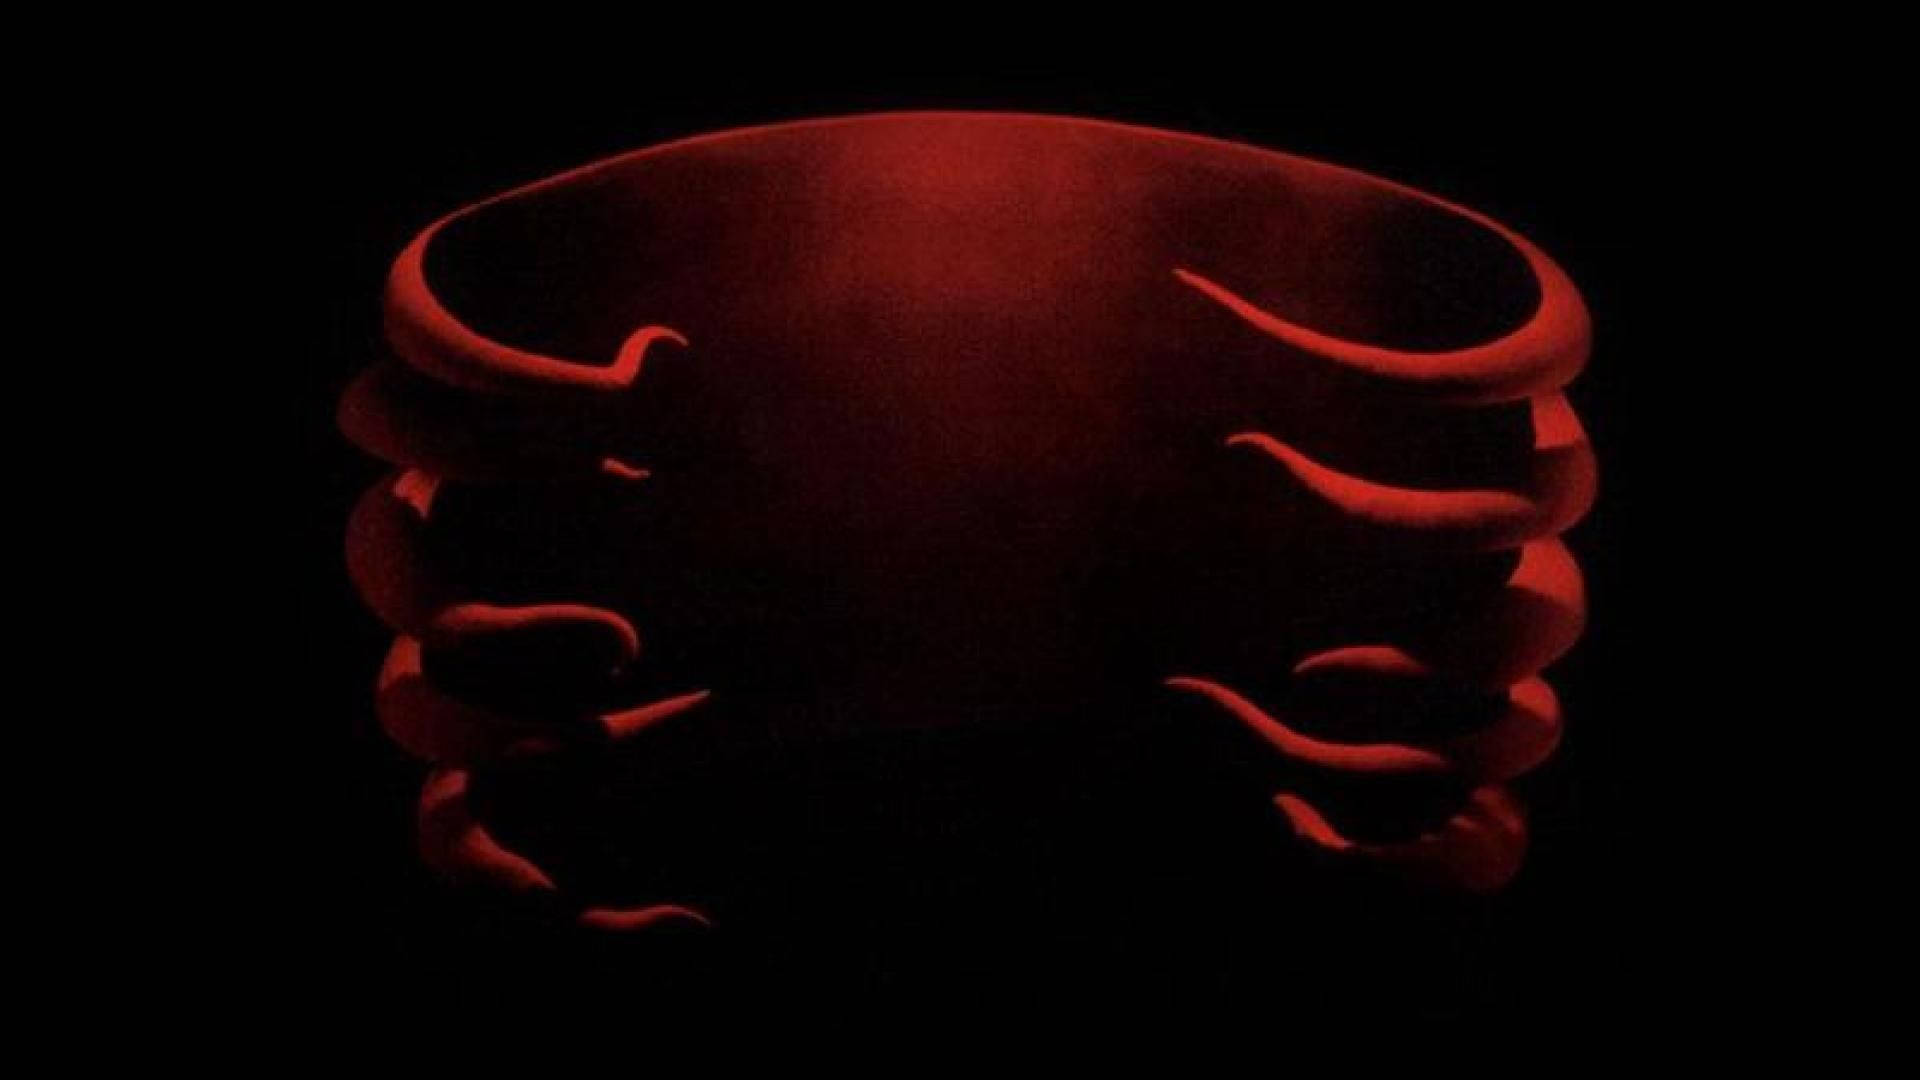 Undertow, the iconic album by Tool Wallpaper